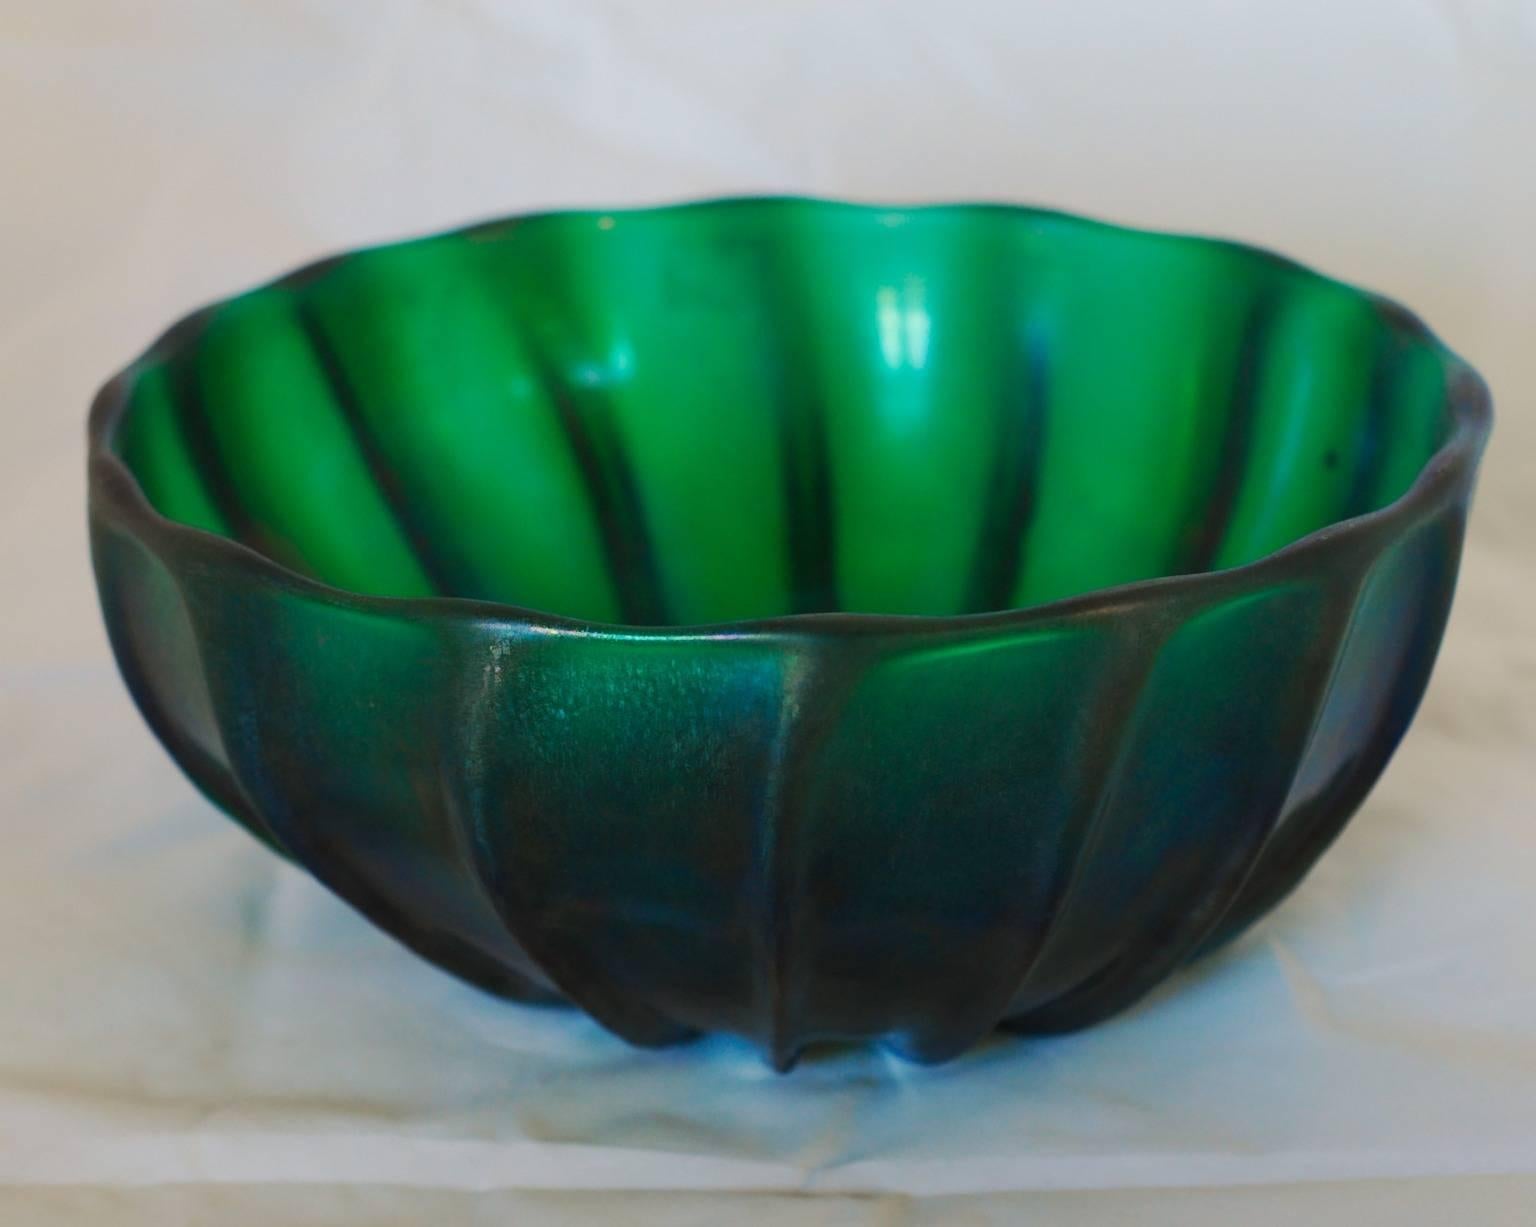 Italian Archimede Seguso Signed Bowl, Green Glass with Iridescence, Serenella 18 Green For Sale